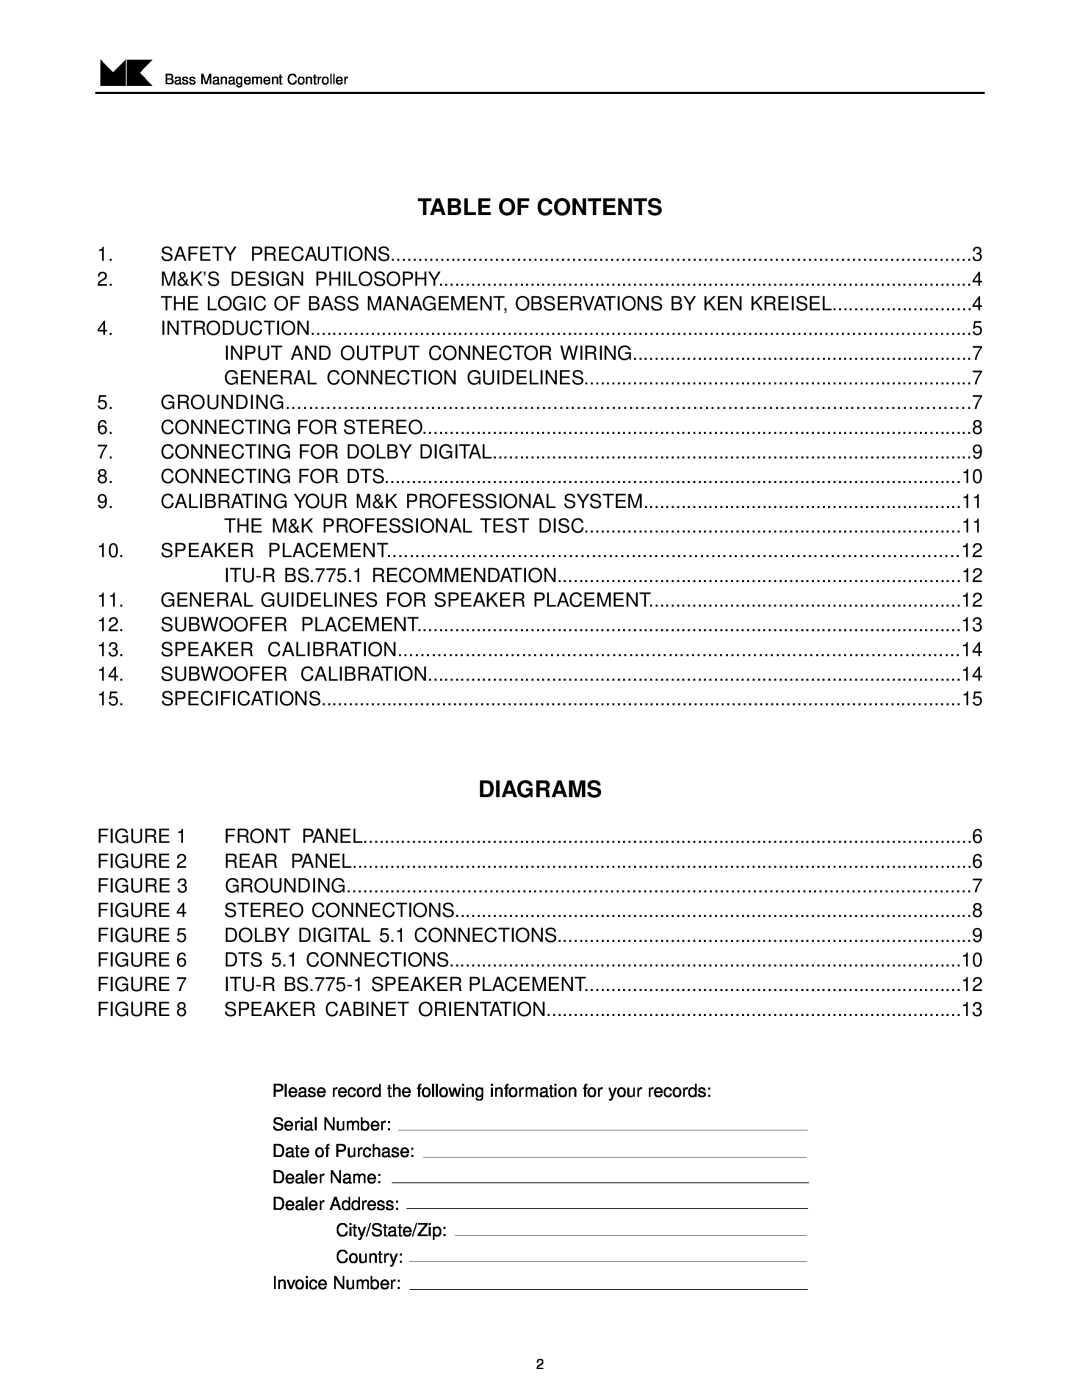 MK Sound LFE-4 operation manual Table Of Contents, Diagrams 